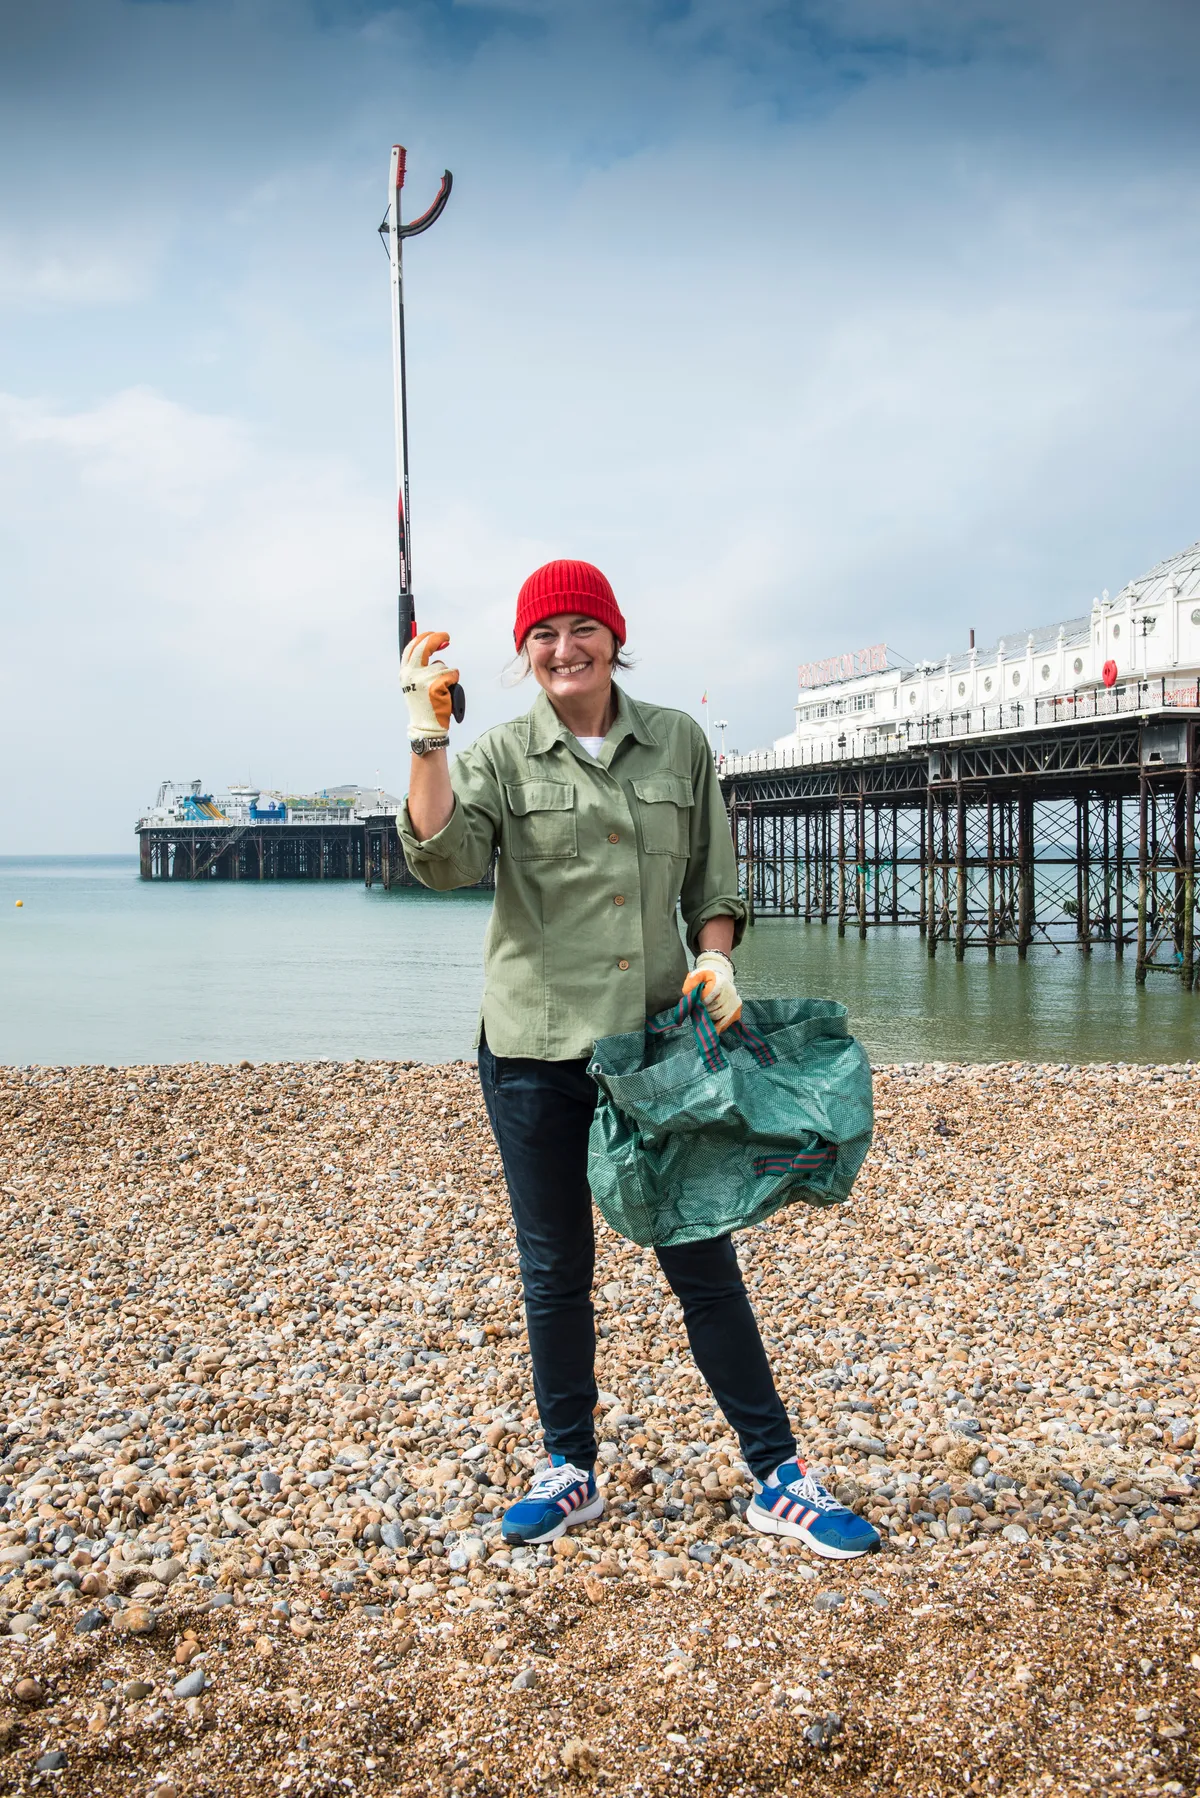 Zoe Lyons in red hat standing in front of Brighton pier holding a litter picker up in the air